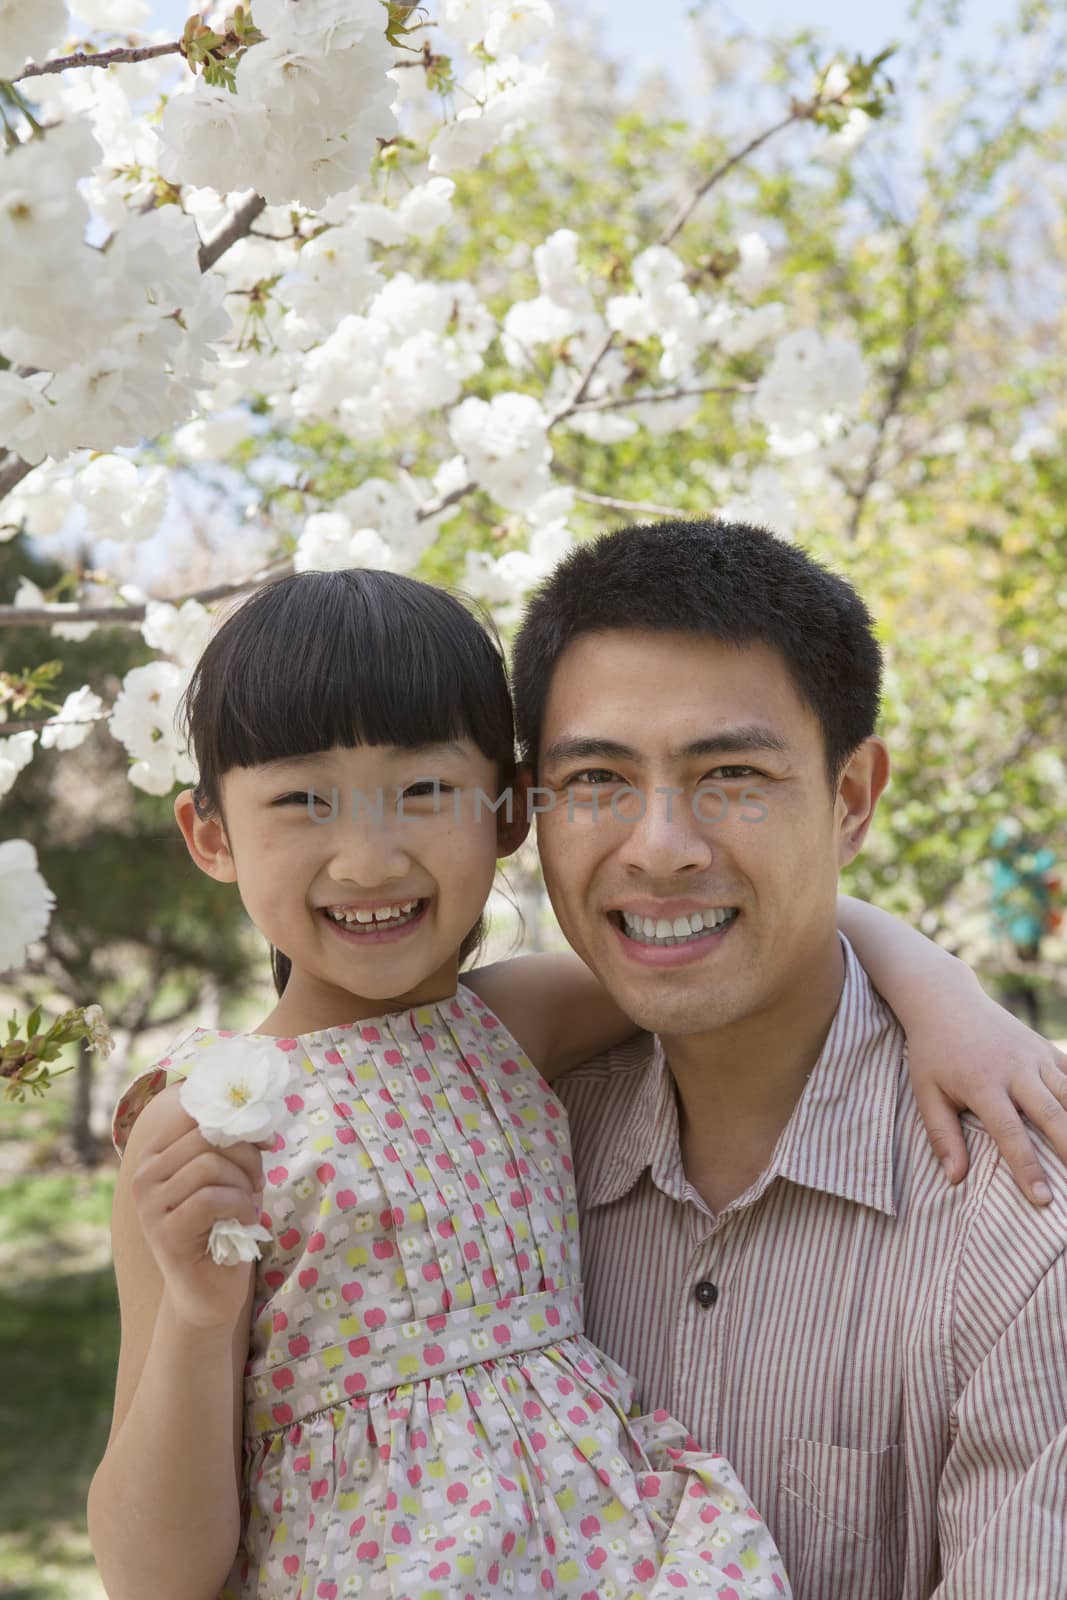 Smiling father and daughter enjoying the cherry blossoms on the tree in the park in springtime, portrait by XiXinXing